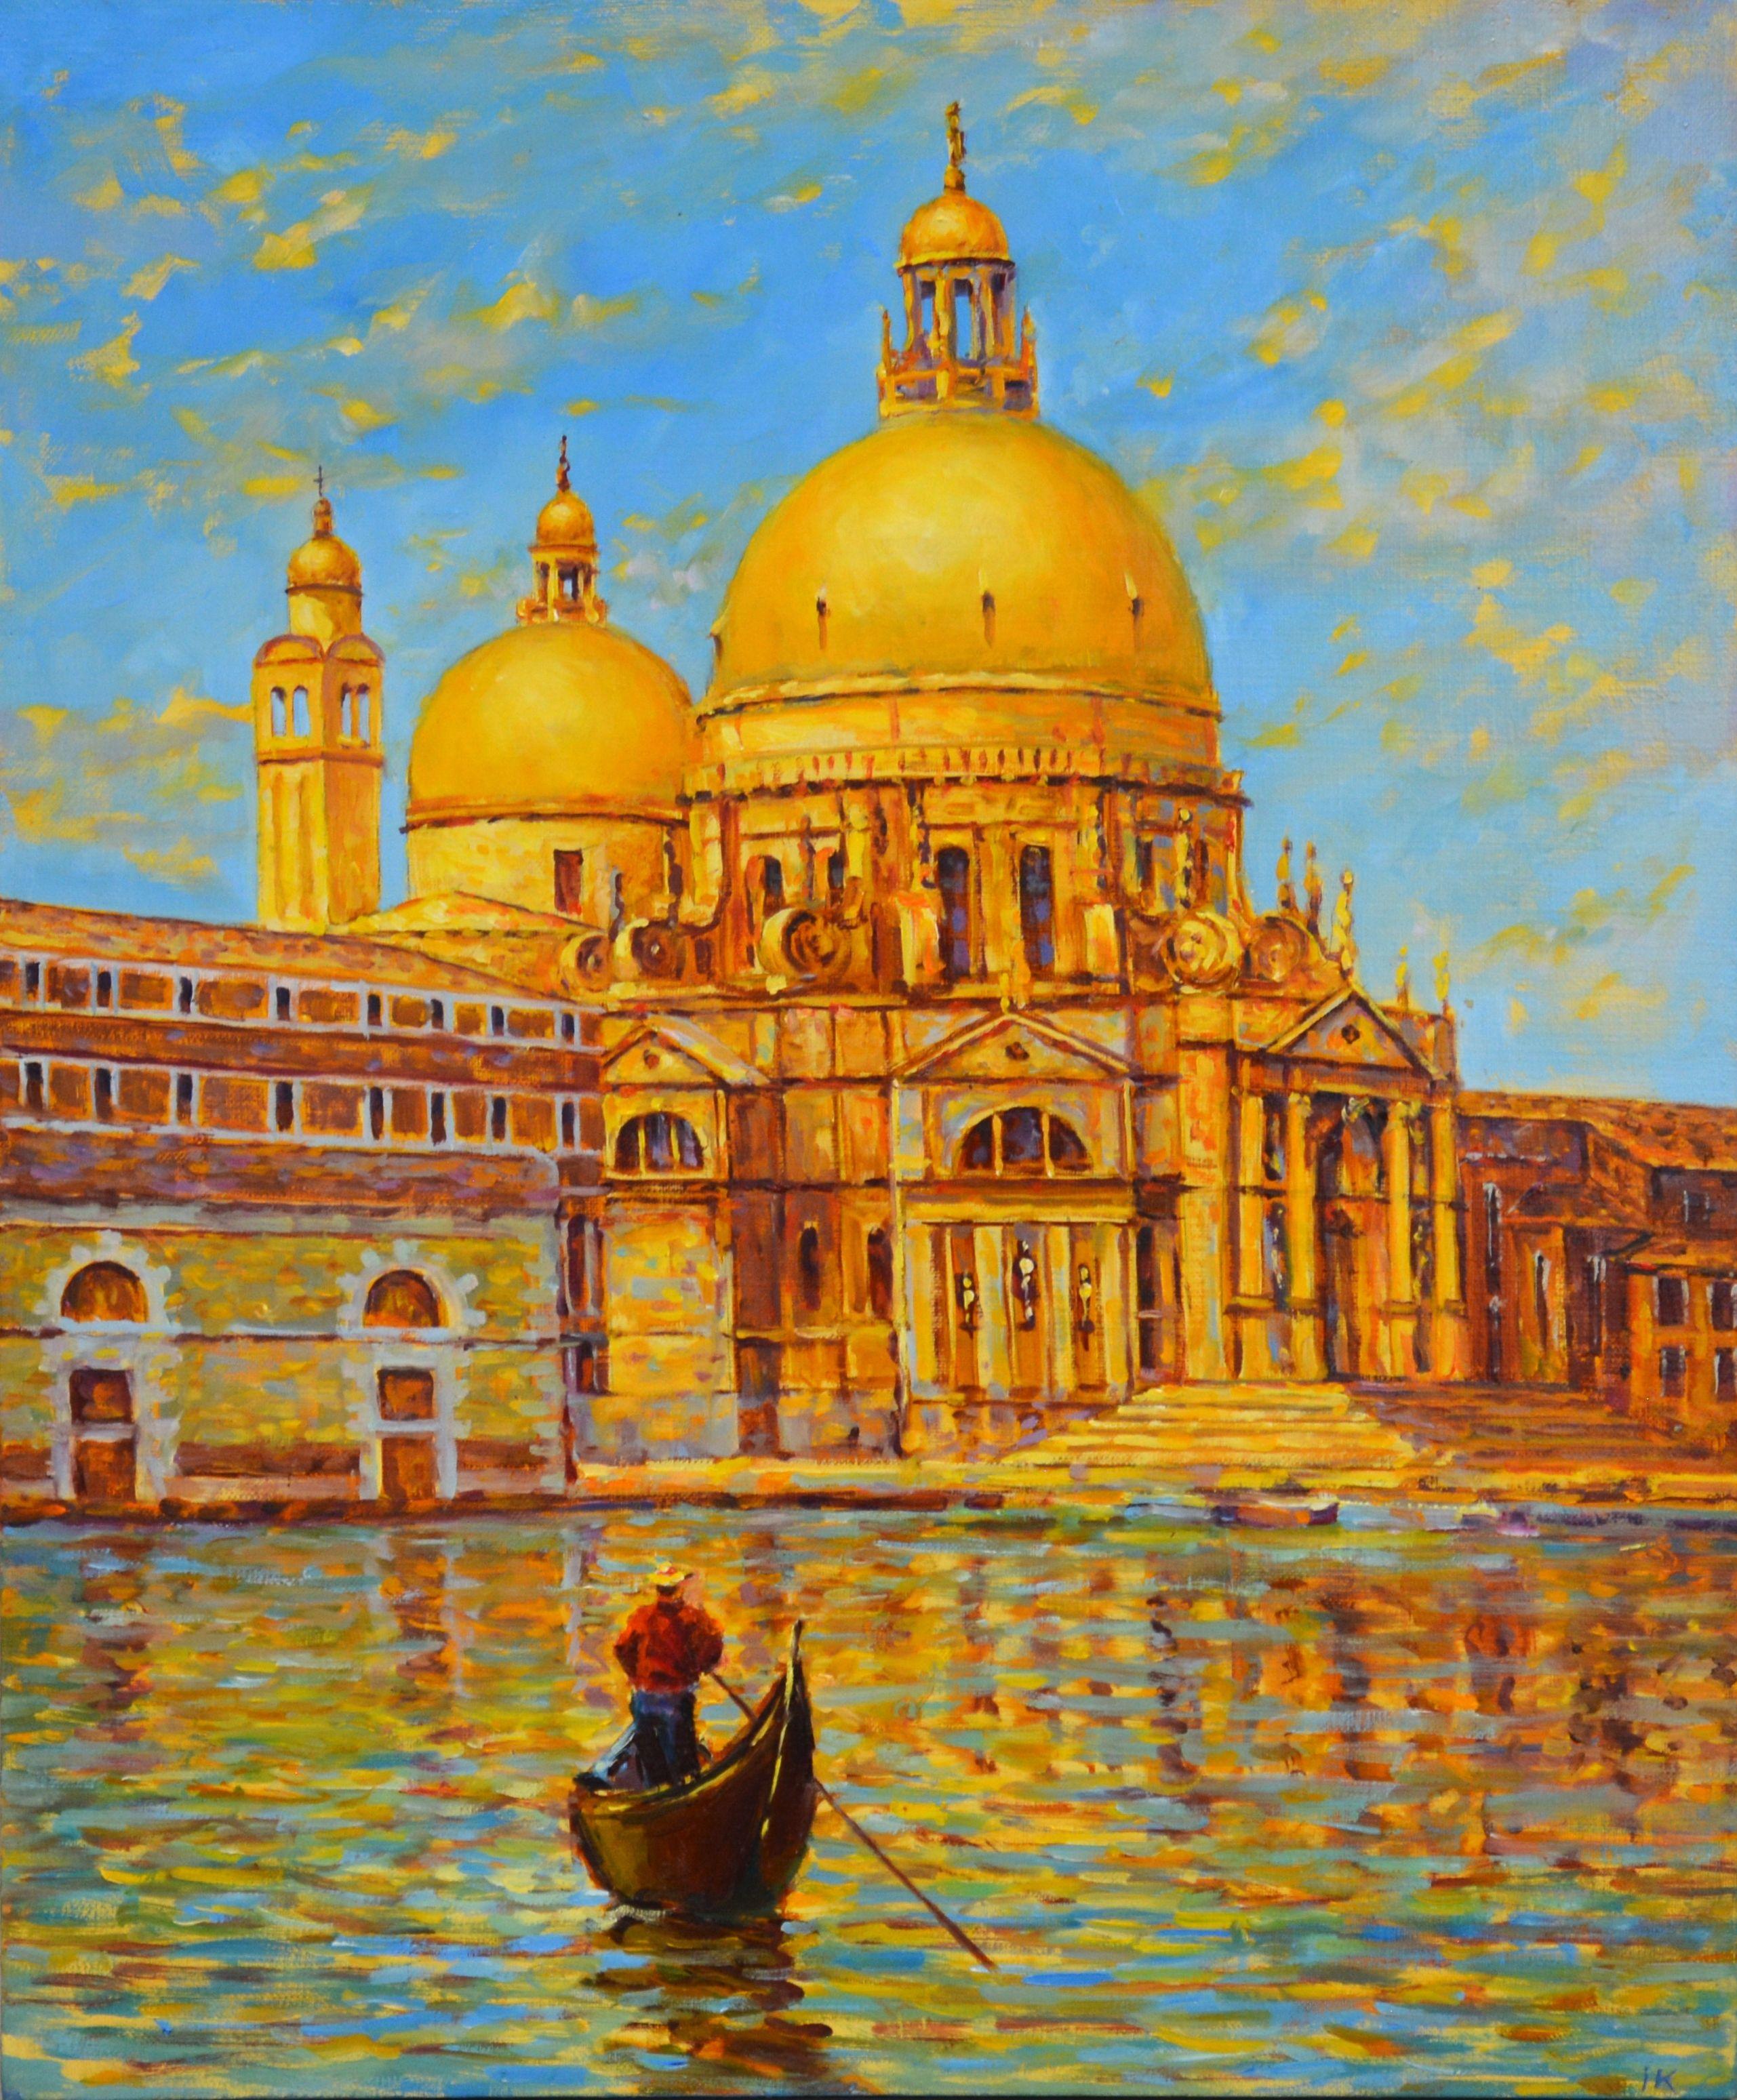 Venetian landscape in the style of expressionism. Cathedral of Santa Maria Della Salute, sea, gandolier. Venice is considered one of the most unusual and beautiful cities in the world. This is a fabulous city on the water, where you can ride a